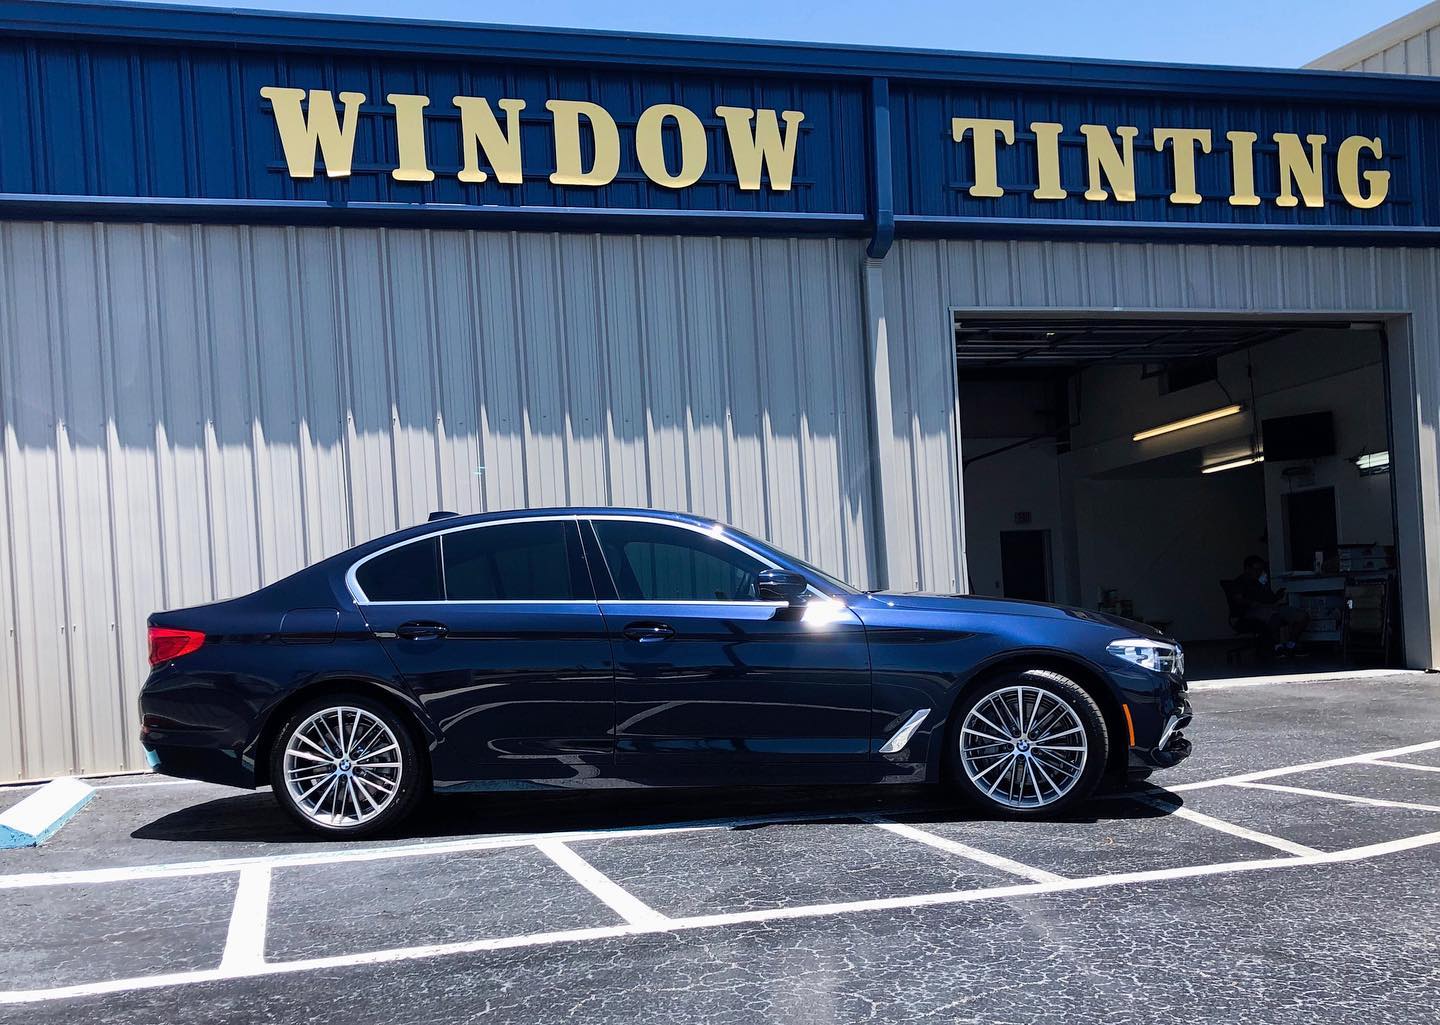 window tinting percentages side windows chart